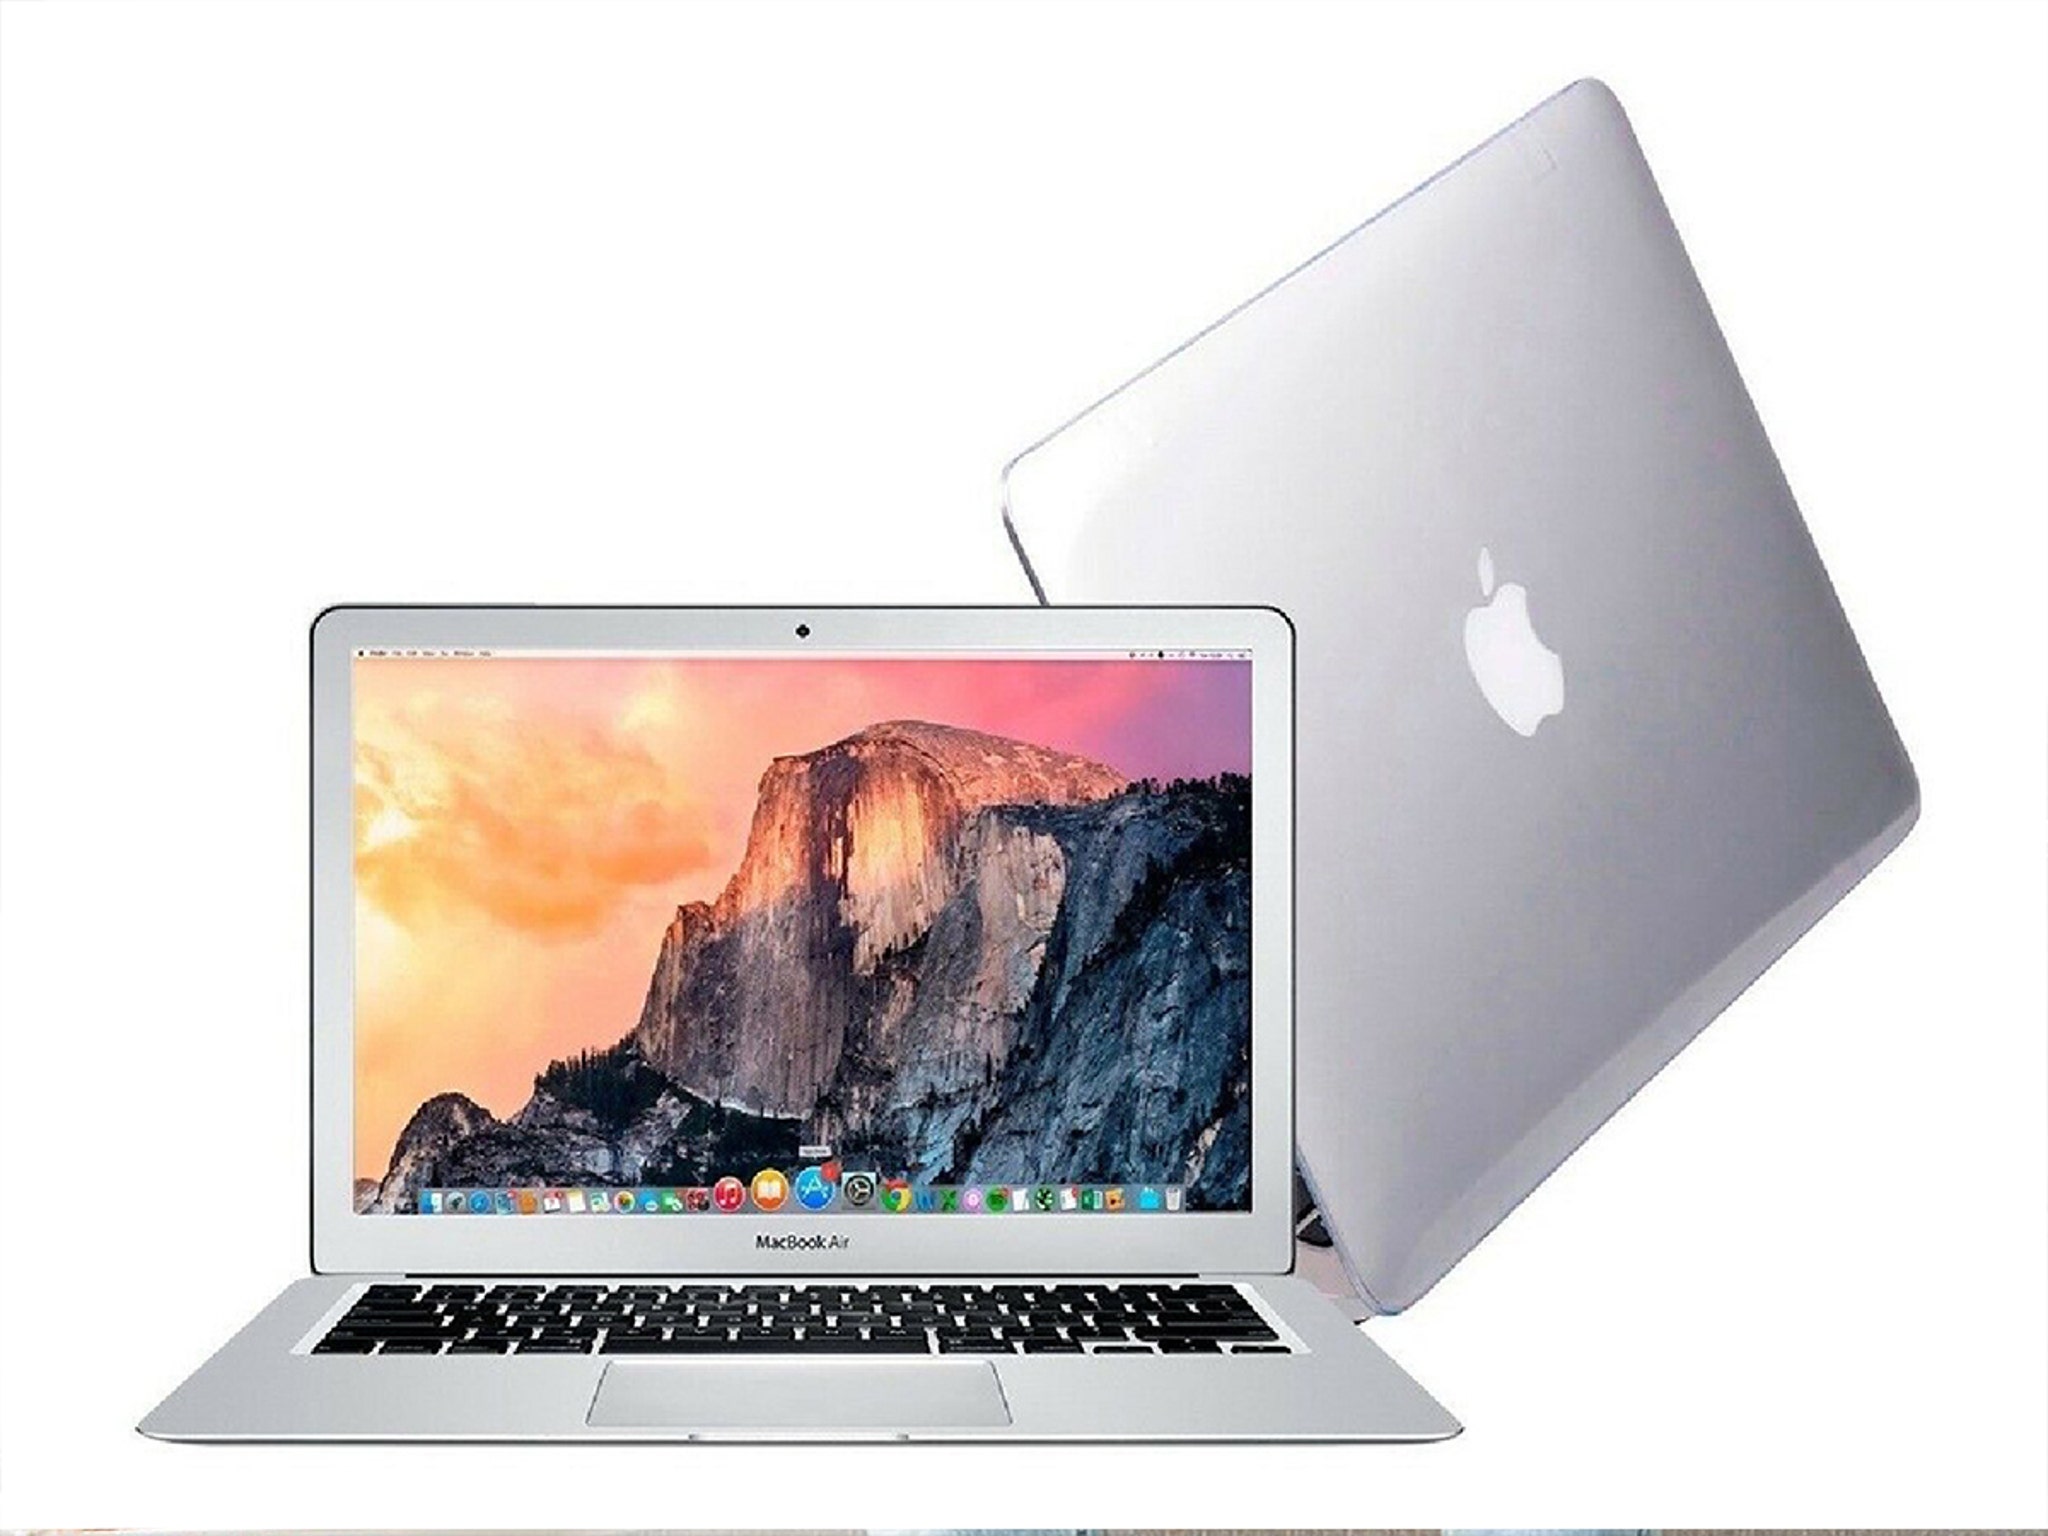 Macbook Pro Deal Just $339.97 For This Refurb